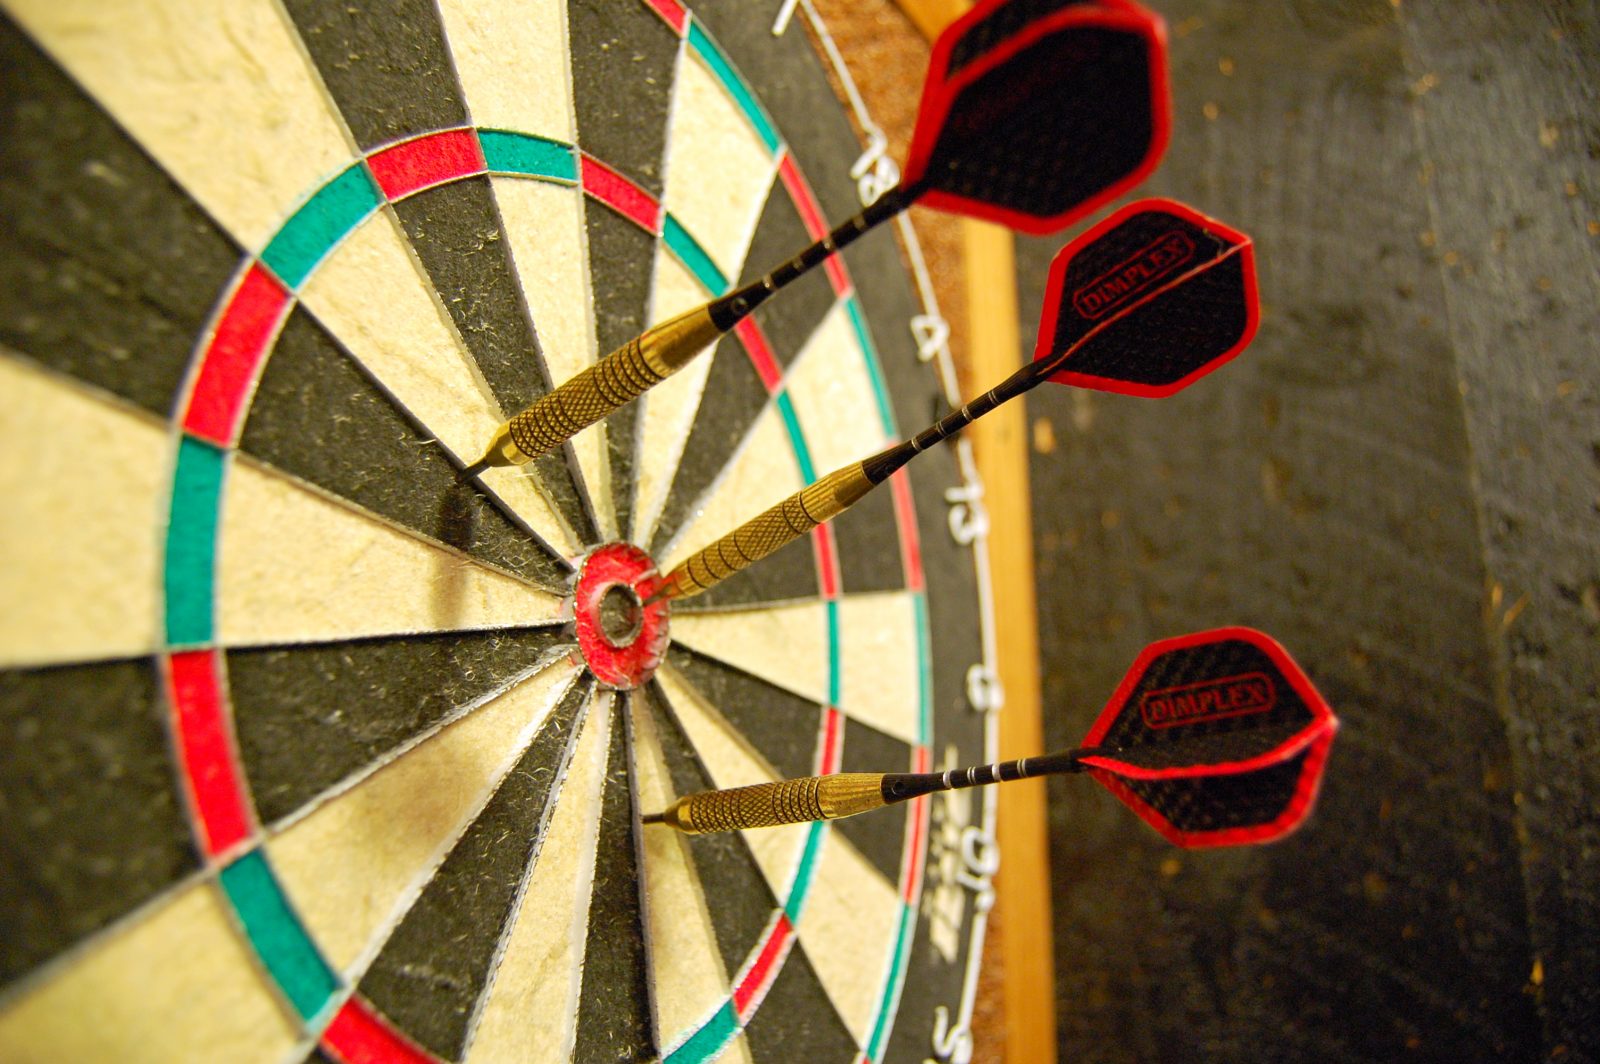 Passing This General Knowledge Quiz Means You Know a Lot About Everything Darts In A Dartboard